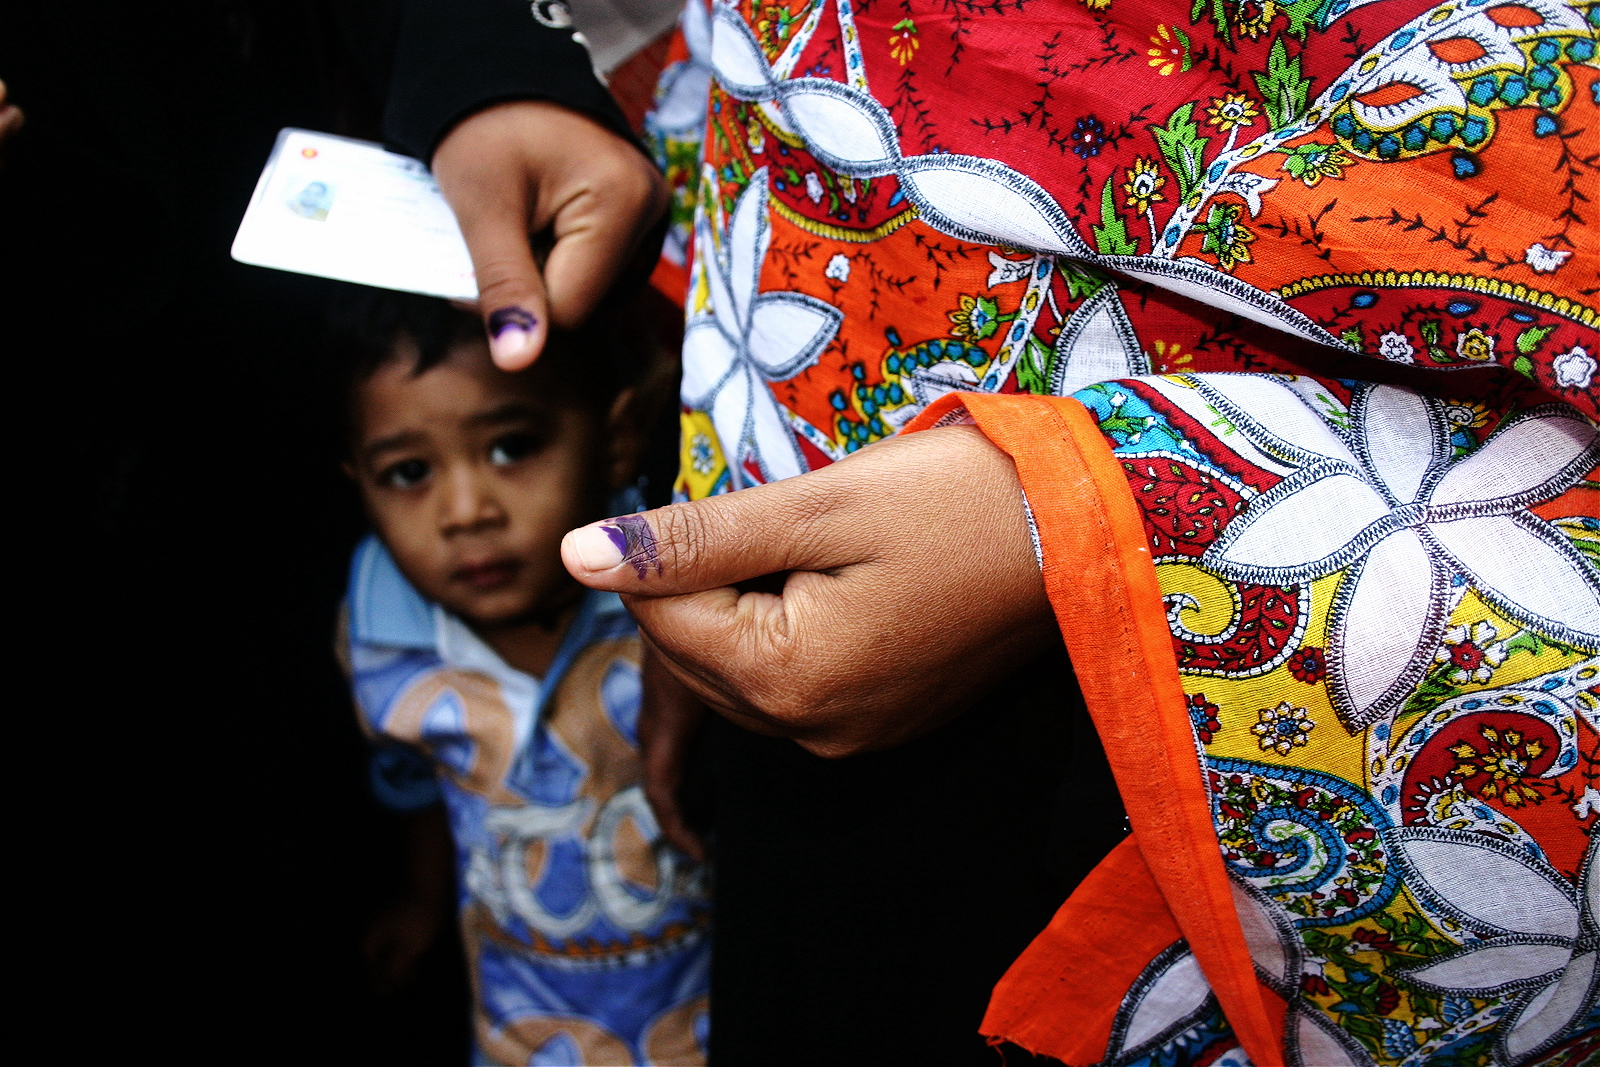 A voter casting her vote in Bangladesh's 2008 parliamentary elections